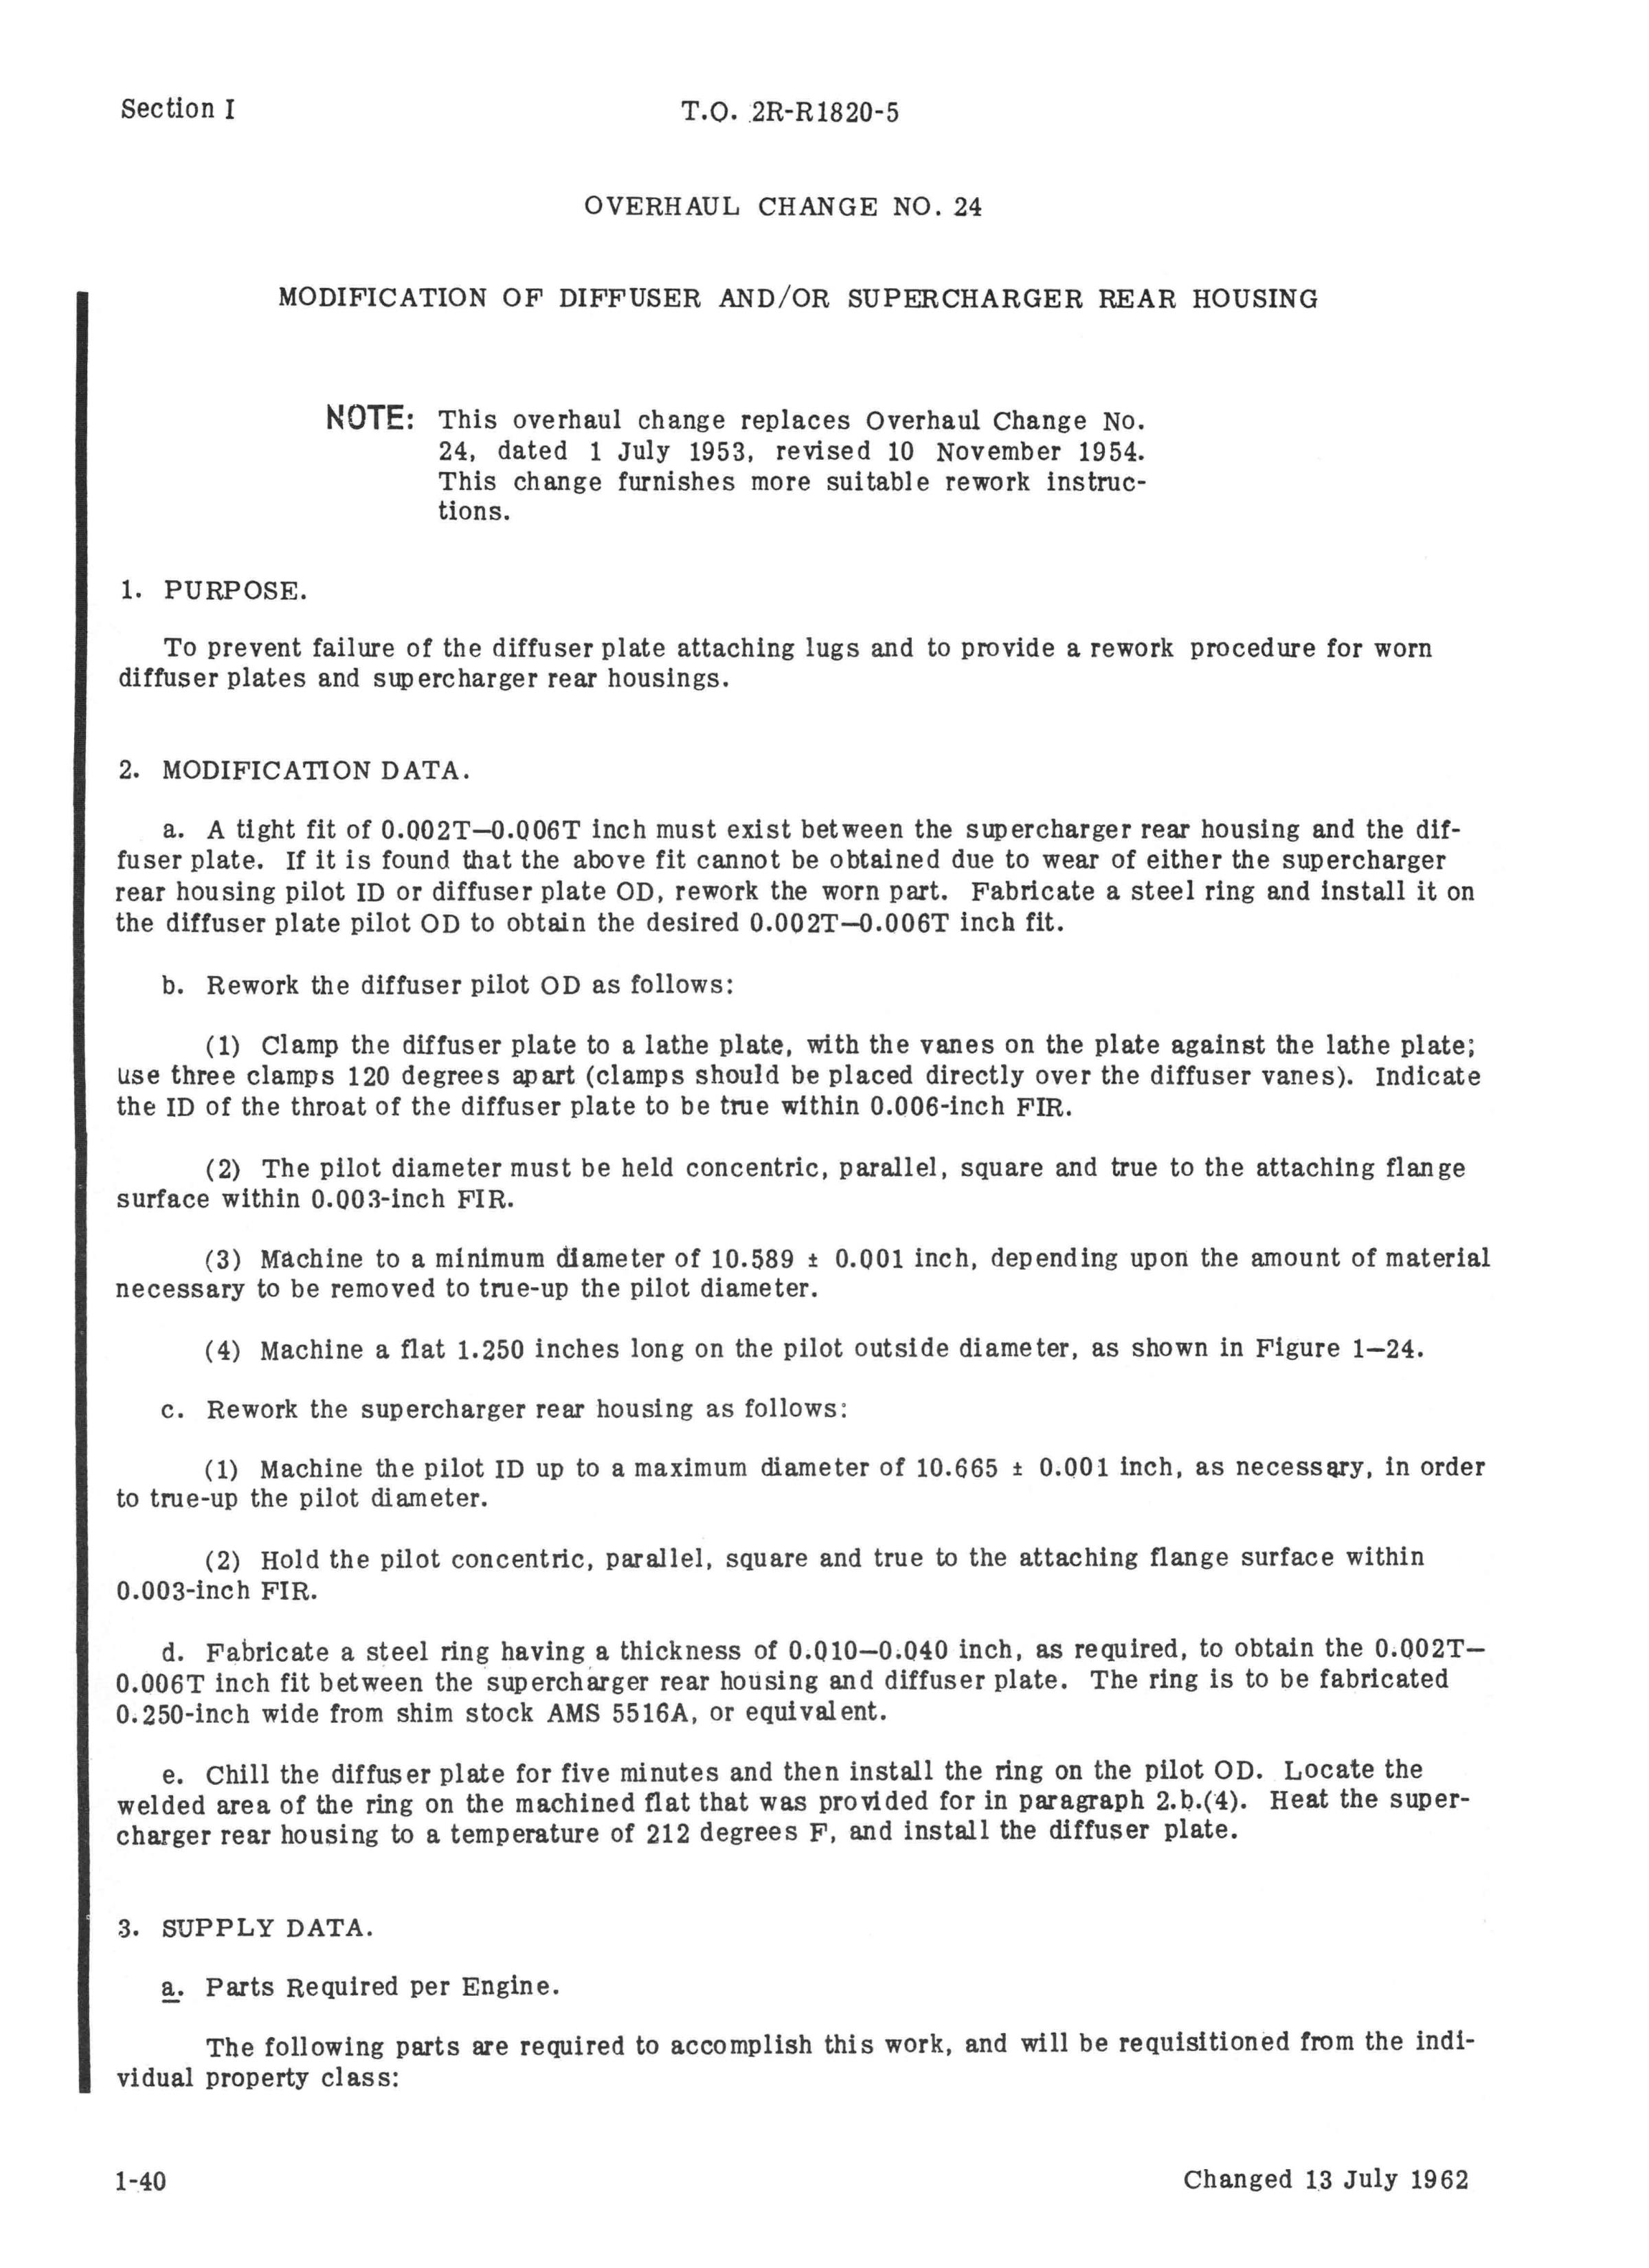 Sample page 4 from AirCorps Library document: Overhaul Changes Applicable to Wright R-1820 Series Engines